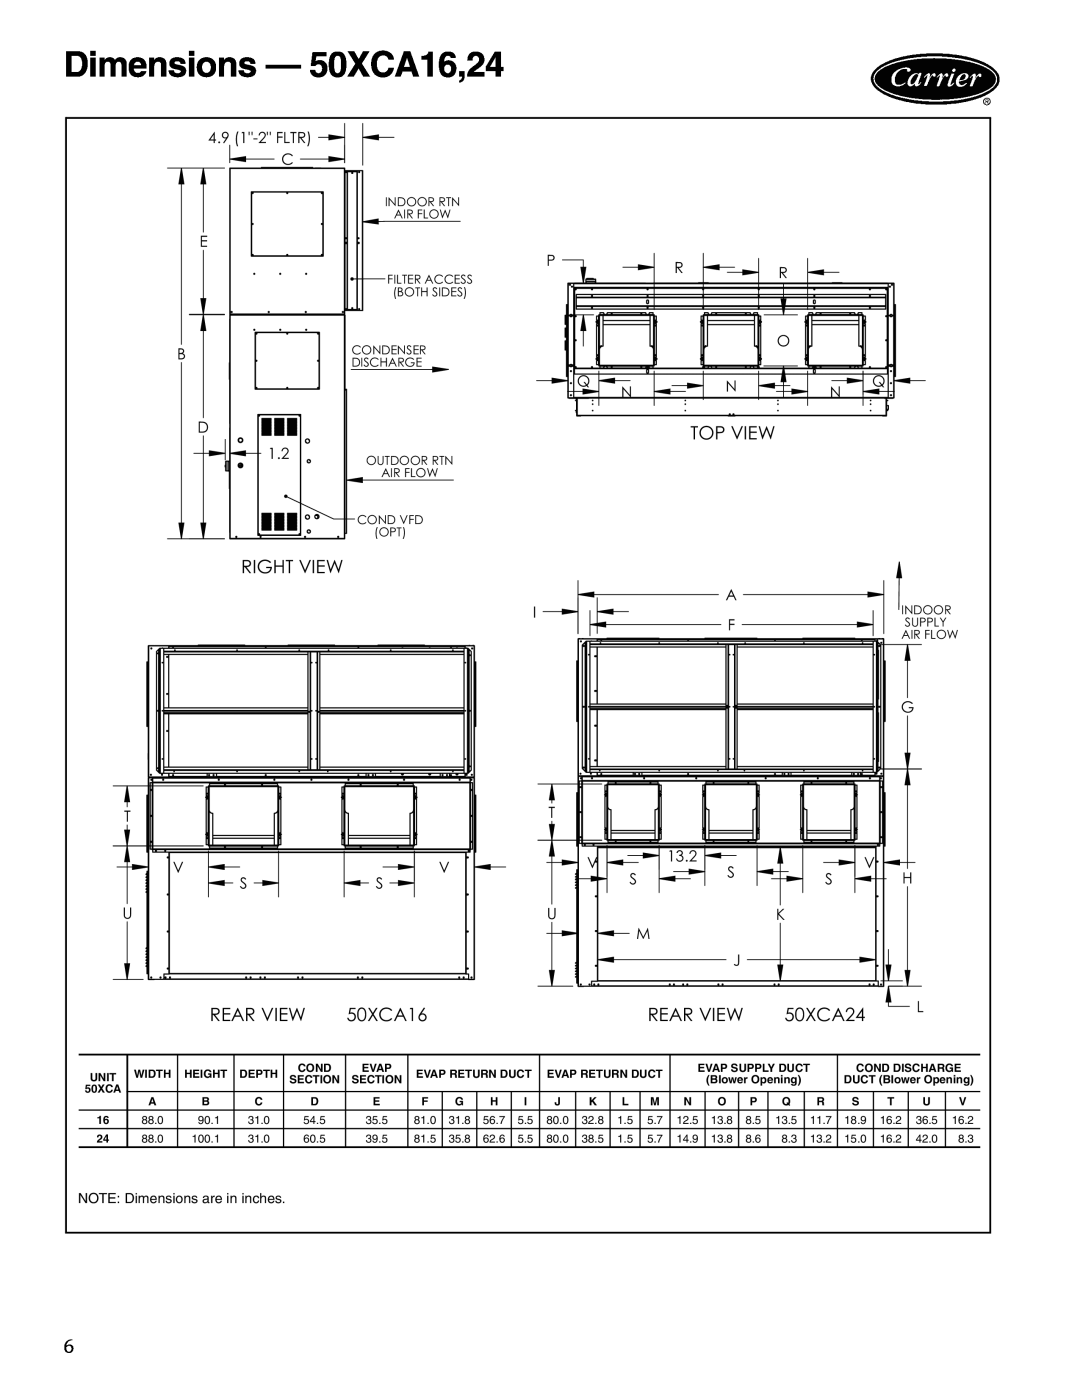 Carrier 50XCA06-24 manual Dimensions — 50XCA16,24, Rear View, 50XCA24, a50-8502 